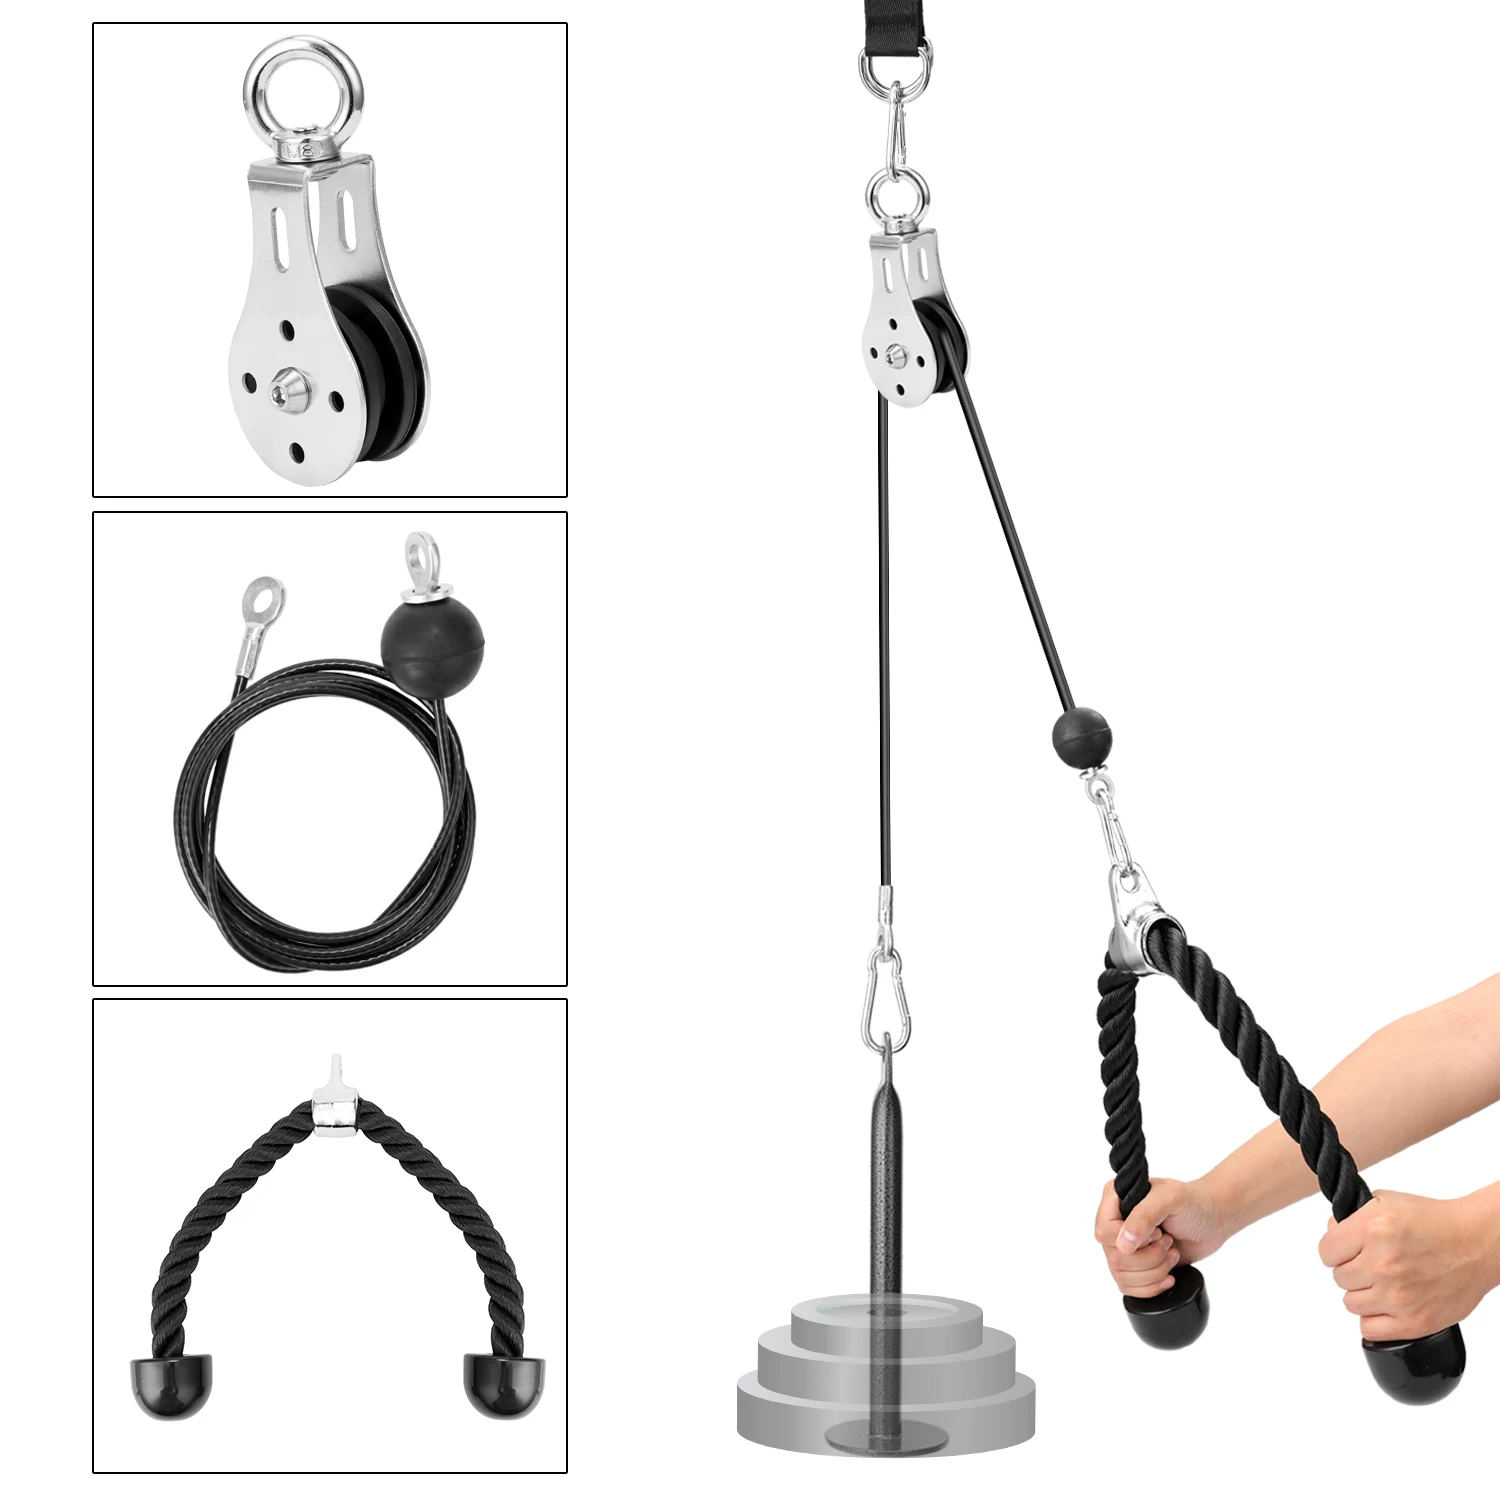 Fitness Pulley Cable Gym Workout Equipment Machine Attachment System DIY Home US 